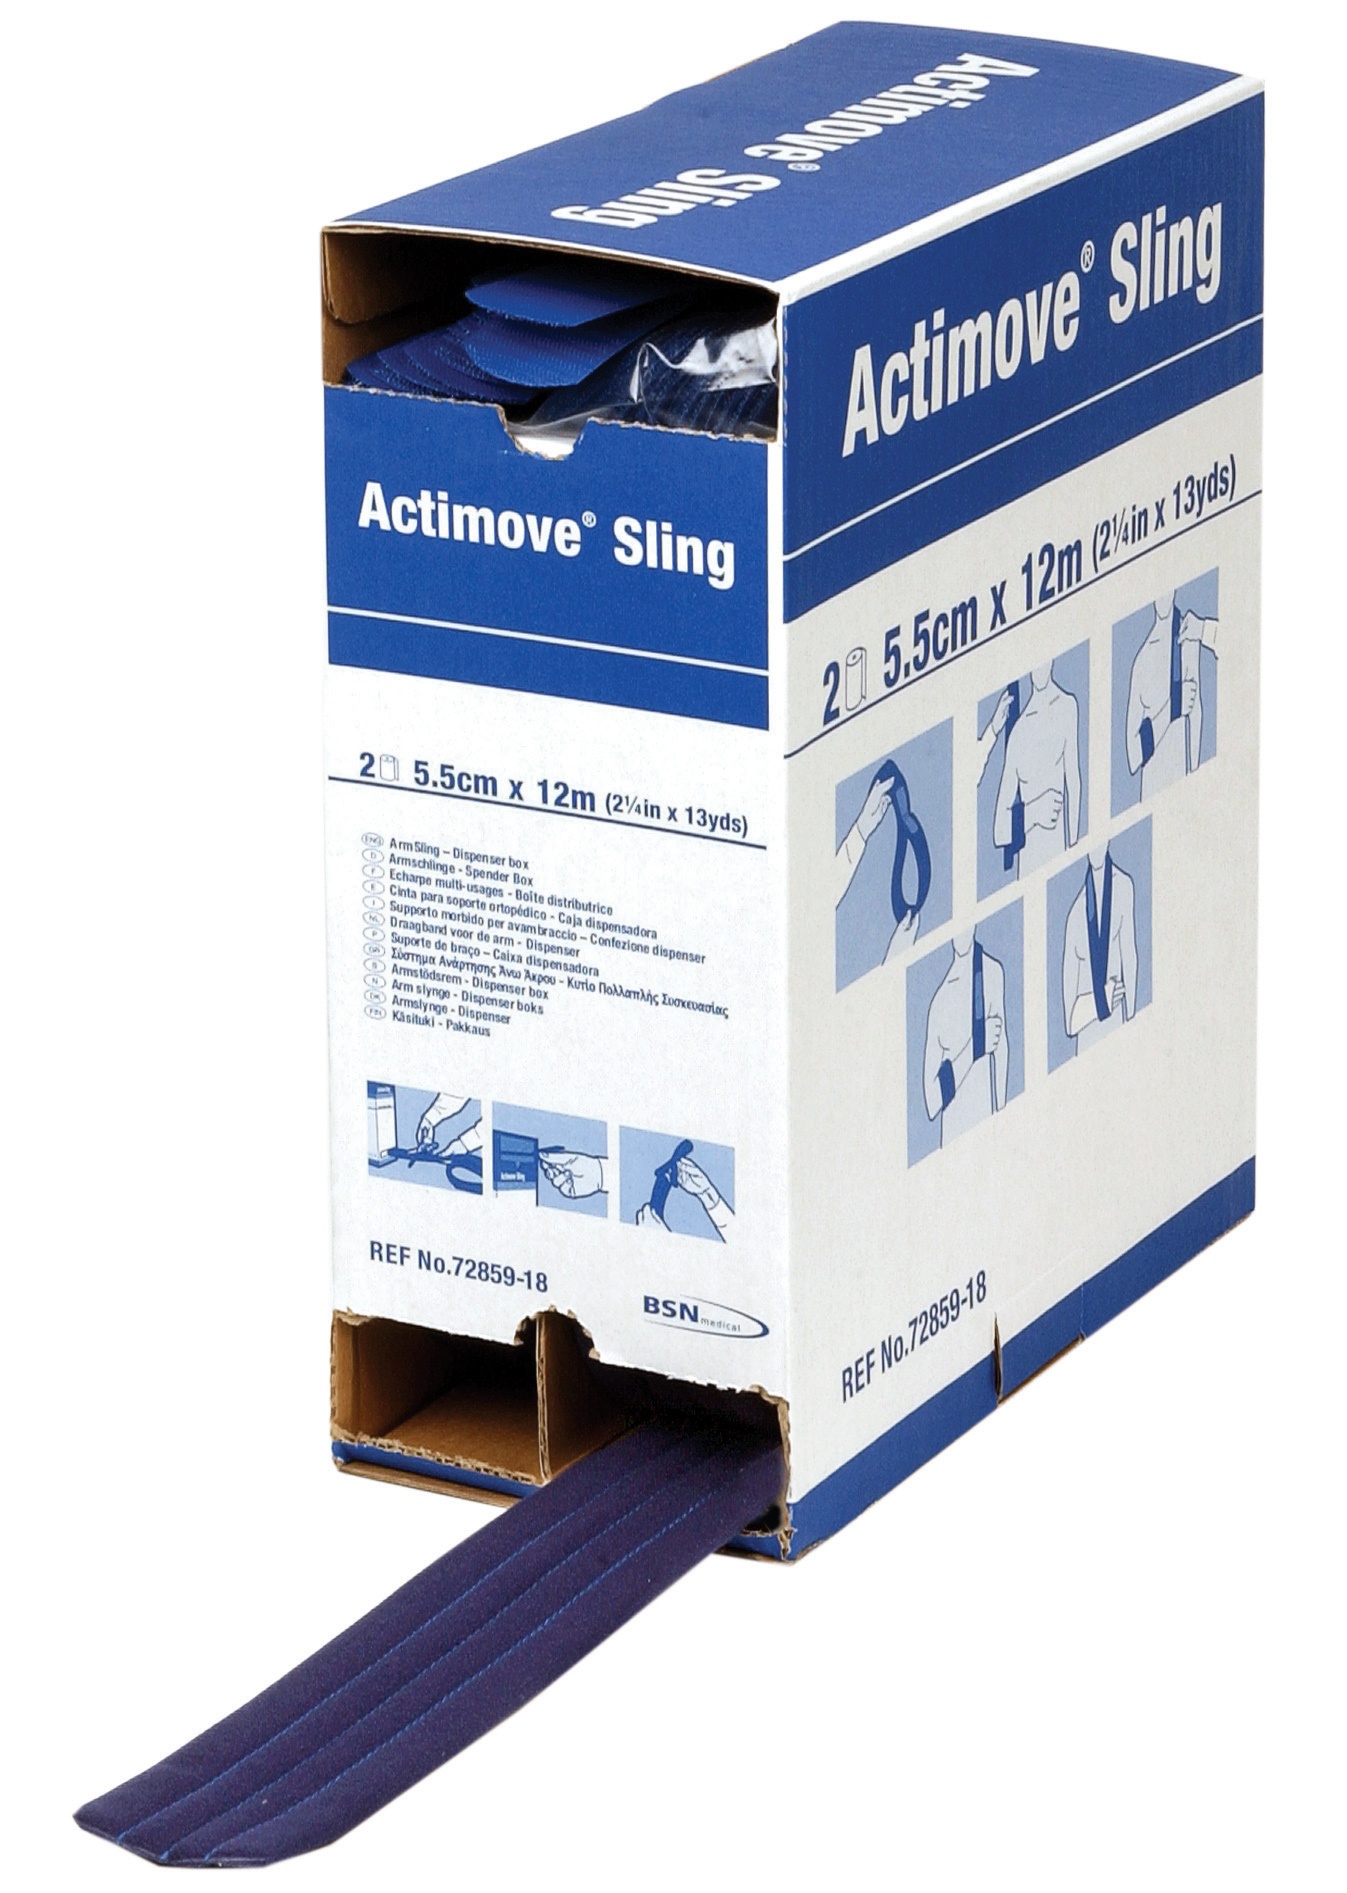 Actimove Sling Collar and Cuff Support 12m roll Bx2